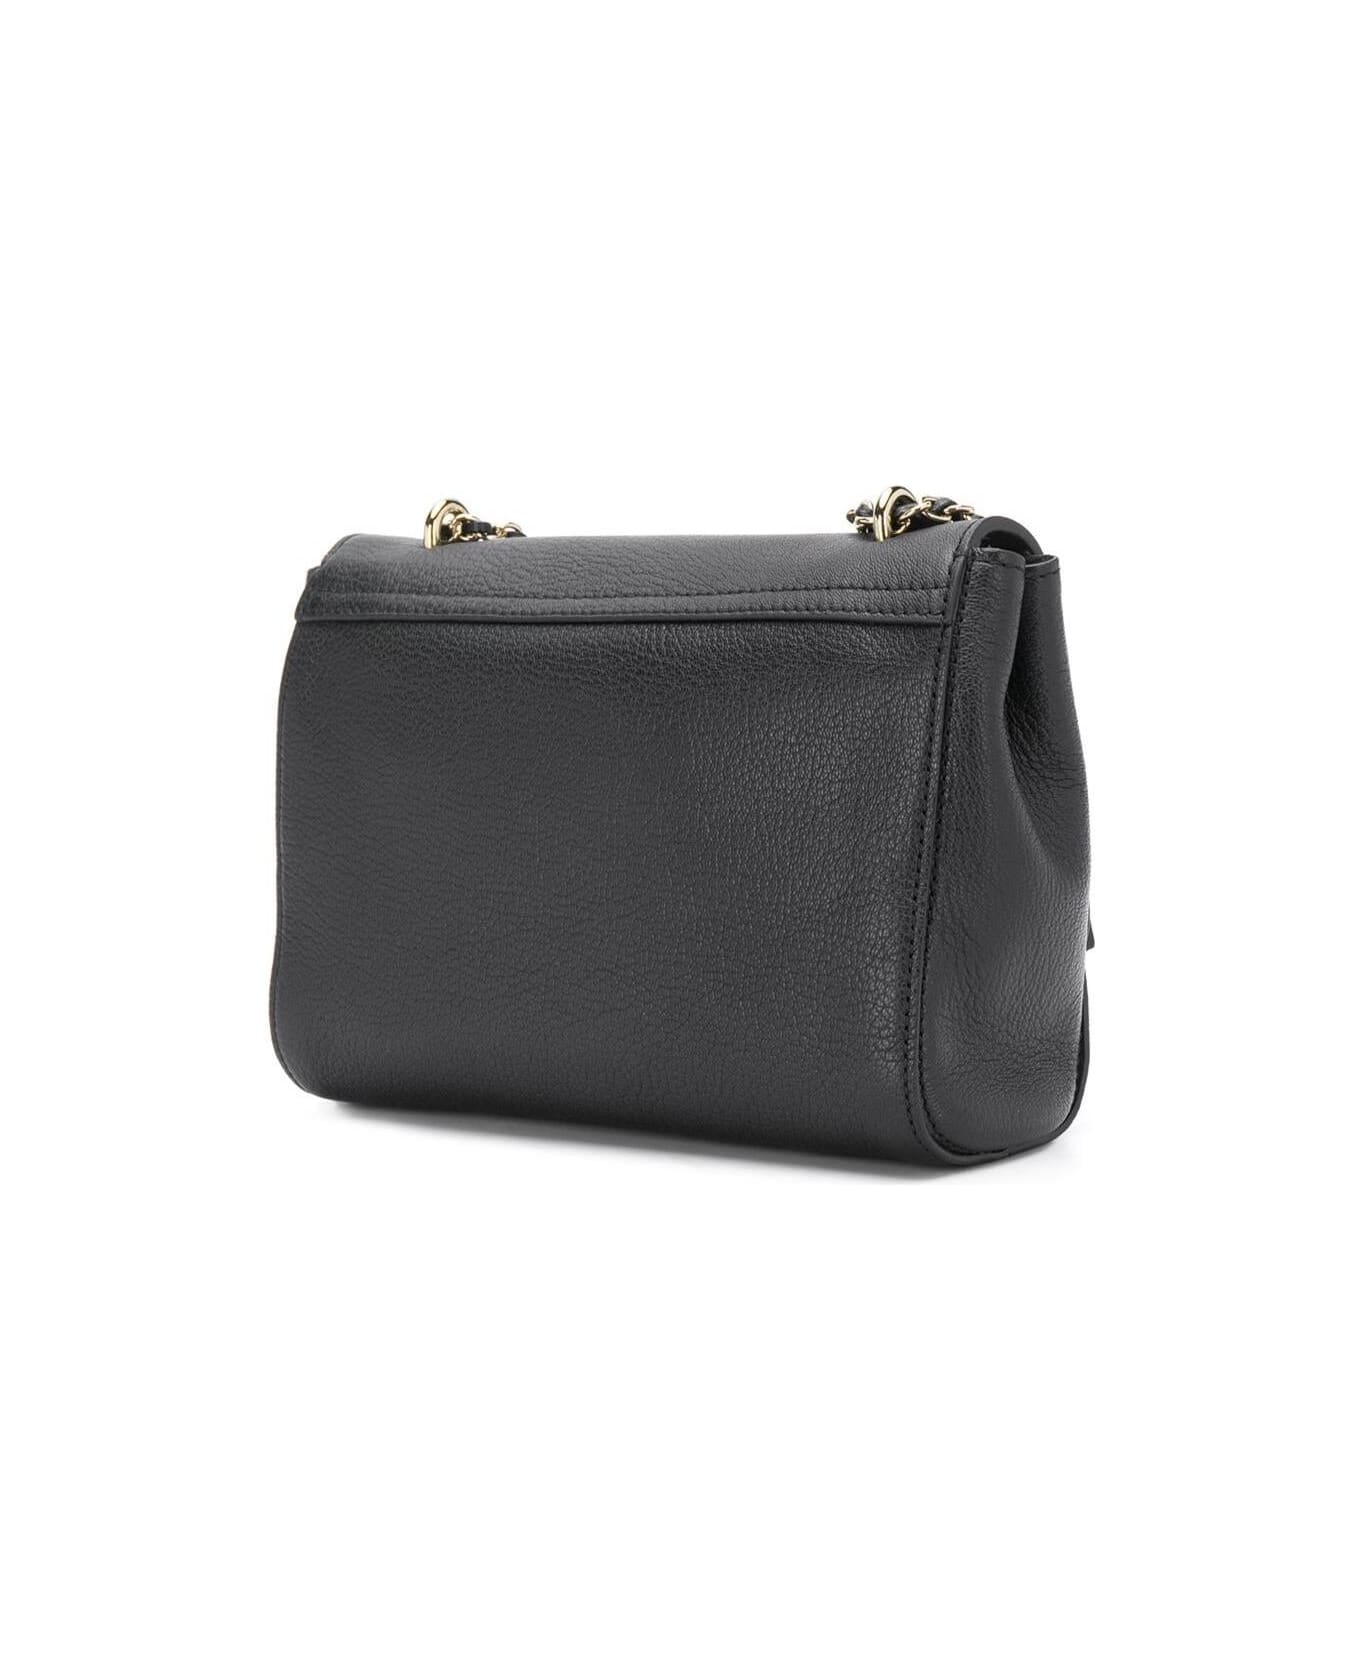 Mulberry 'lilly' Black Shoulder Bag With Twist Lock Closure In Leather Woman - Black